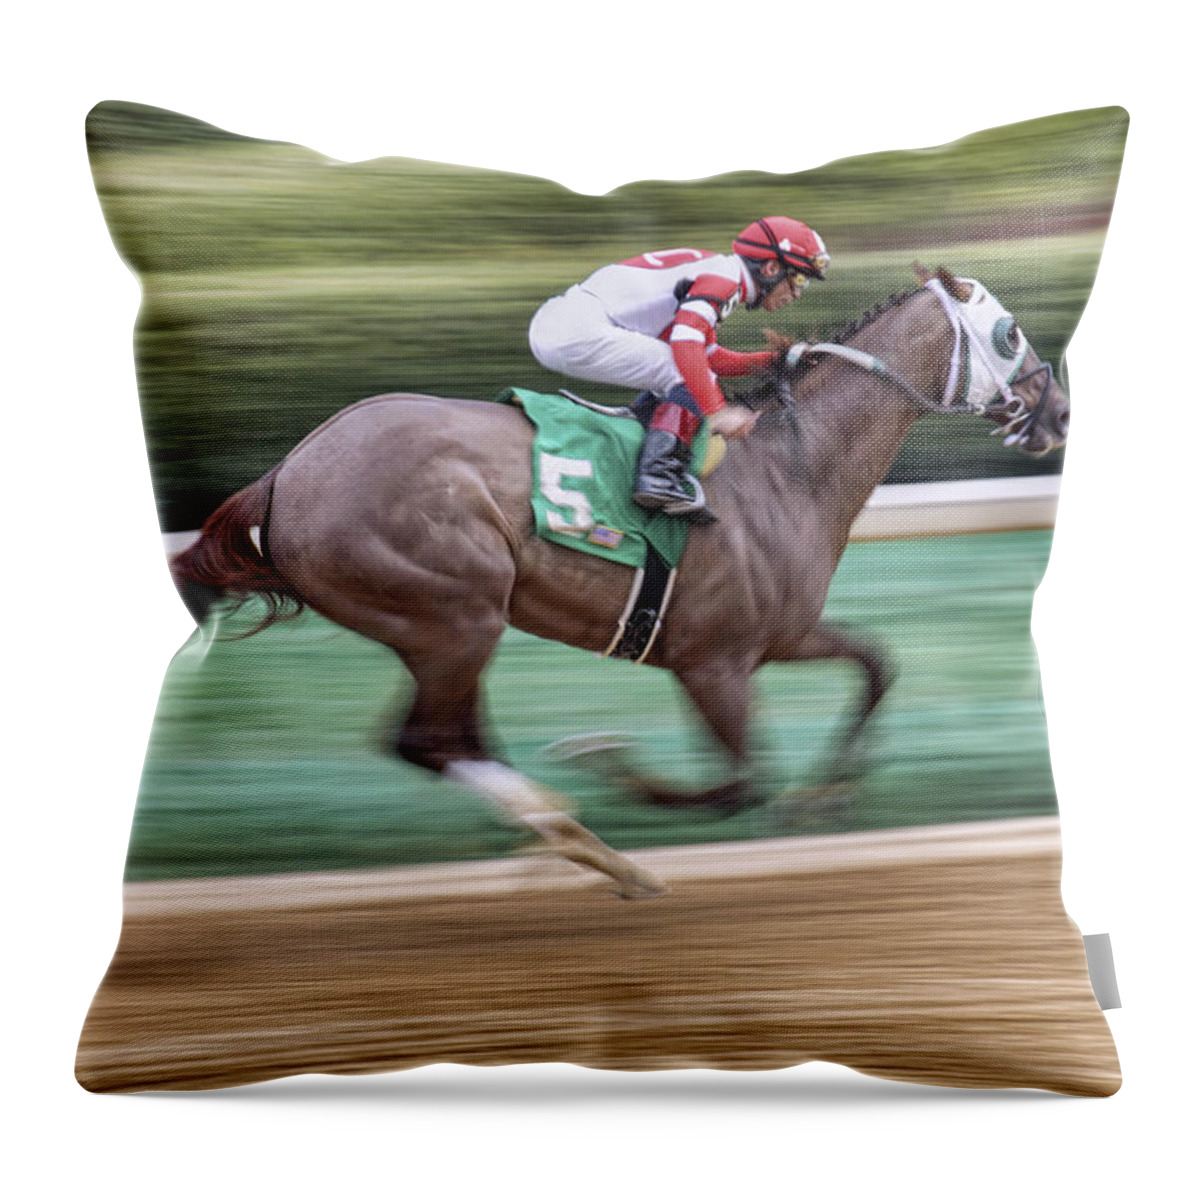 Horse Racing Throw Pillow featuring the photograph Down the Stretch - Horse Racing - Jockey by Jason Politte